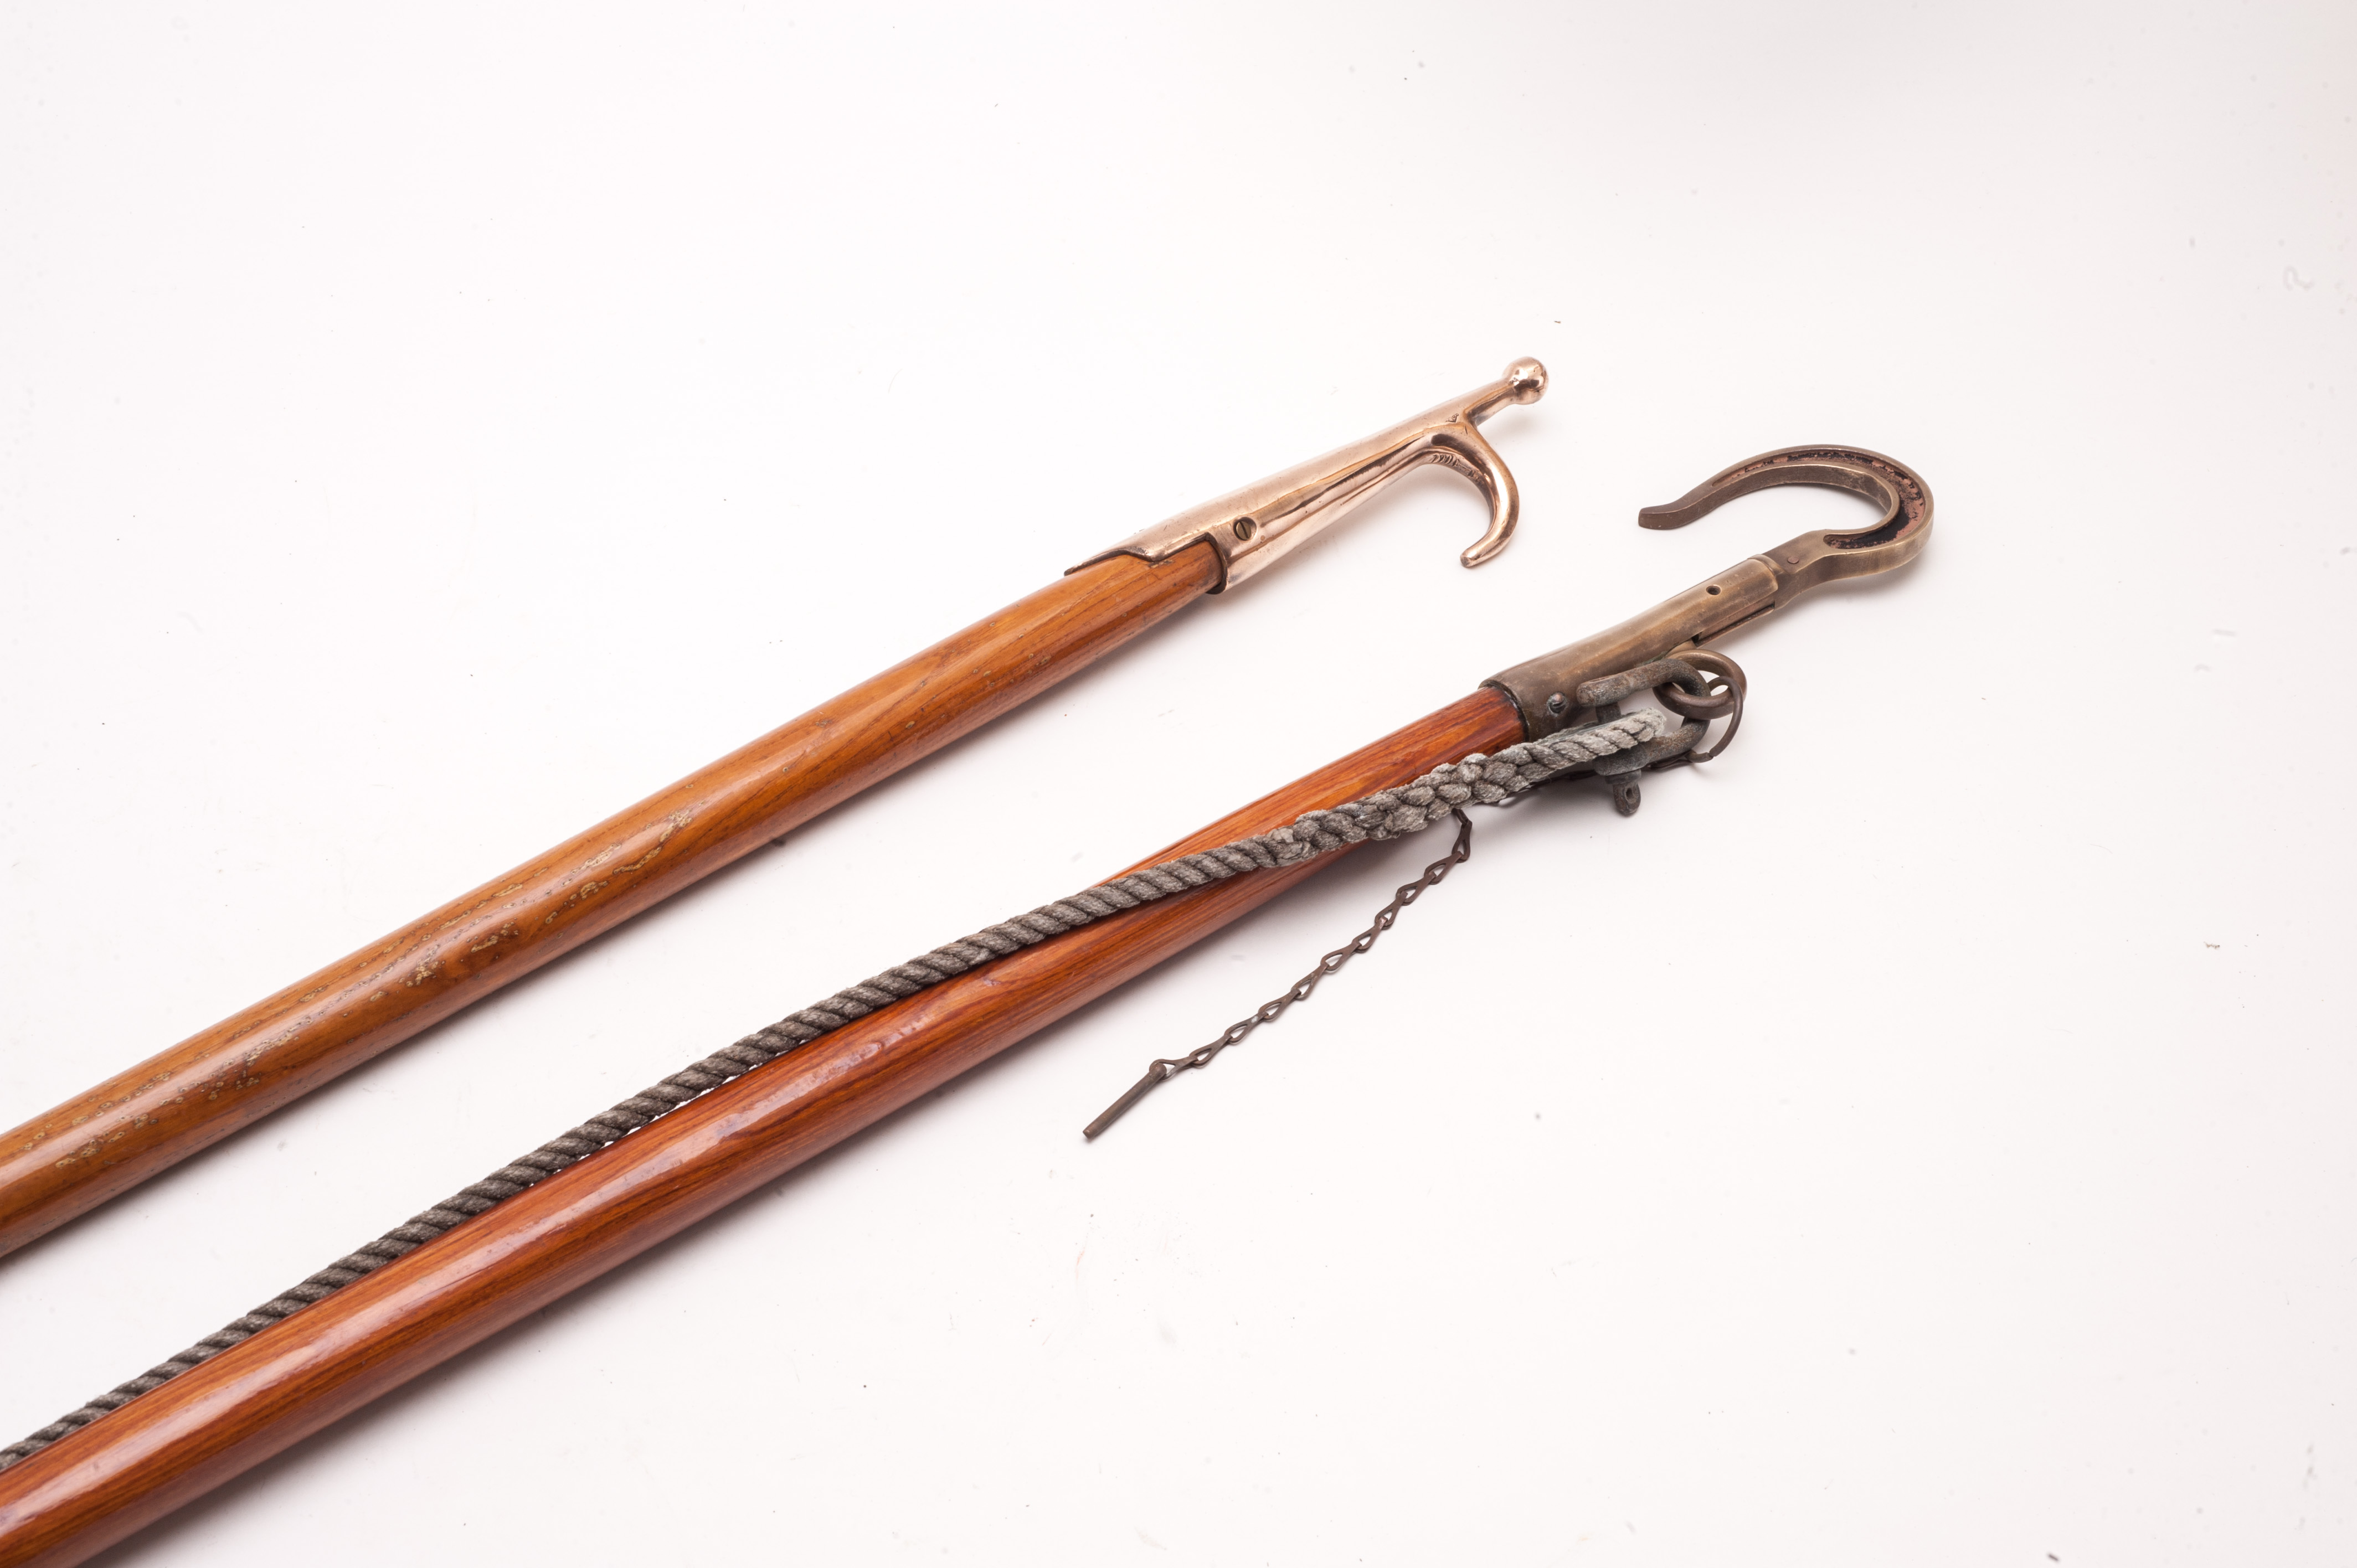 Two useful boat hooks, both on wooden poles, one polished bronze with single hook and the other